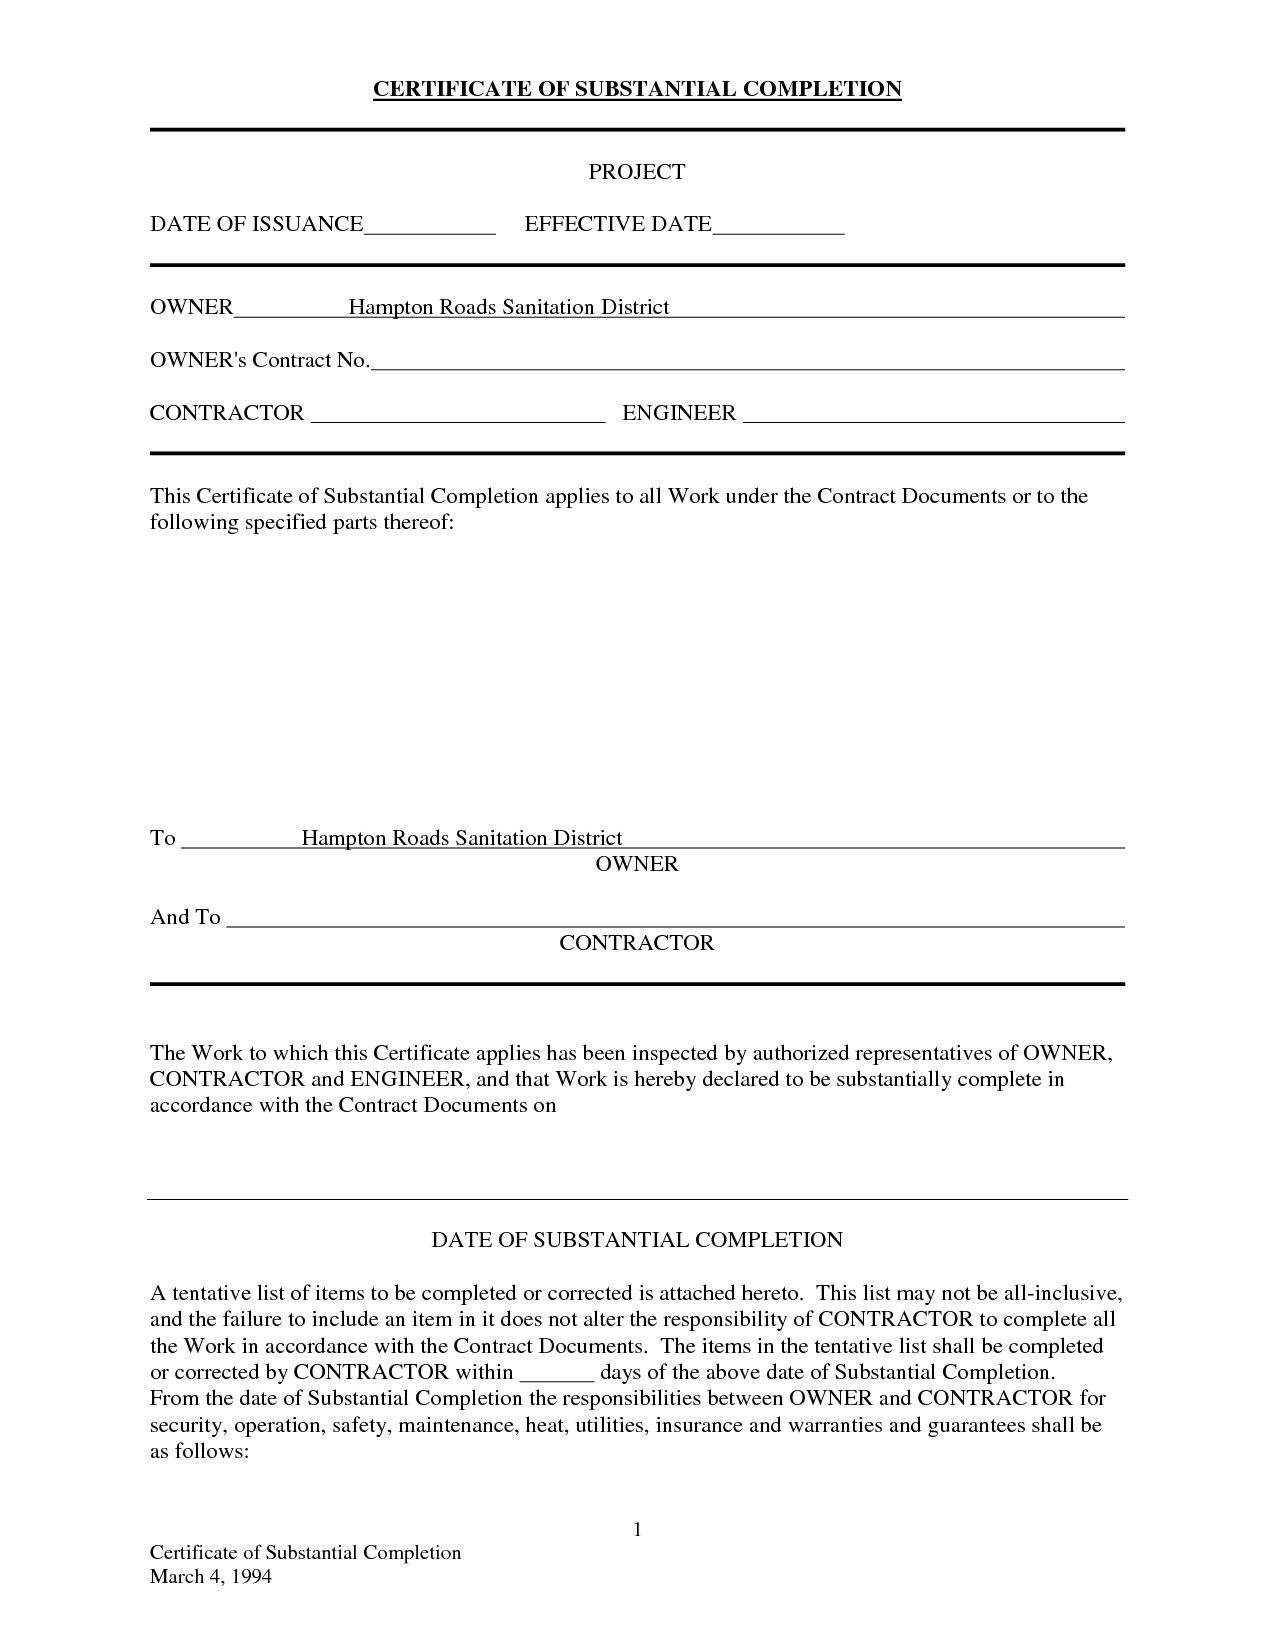 Letter Of Substantial Completion – Free Printable Documents With Regard To Certificate Of Substantial Completion Template